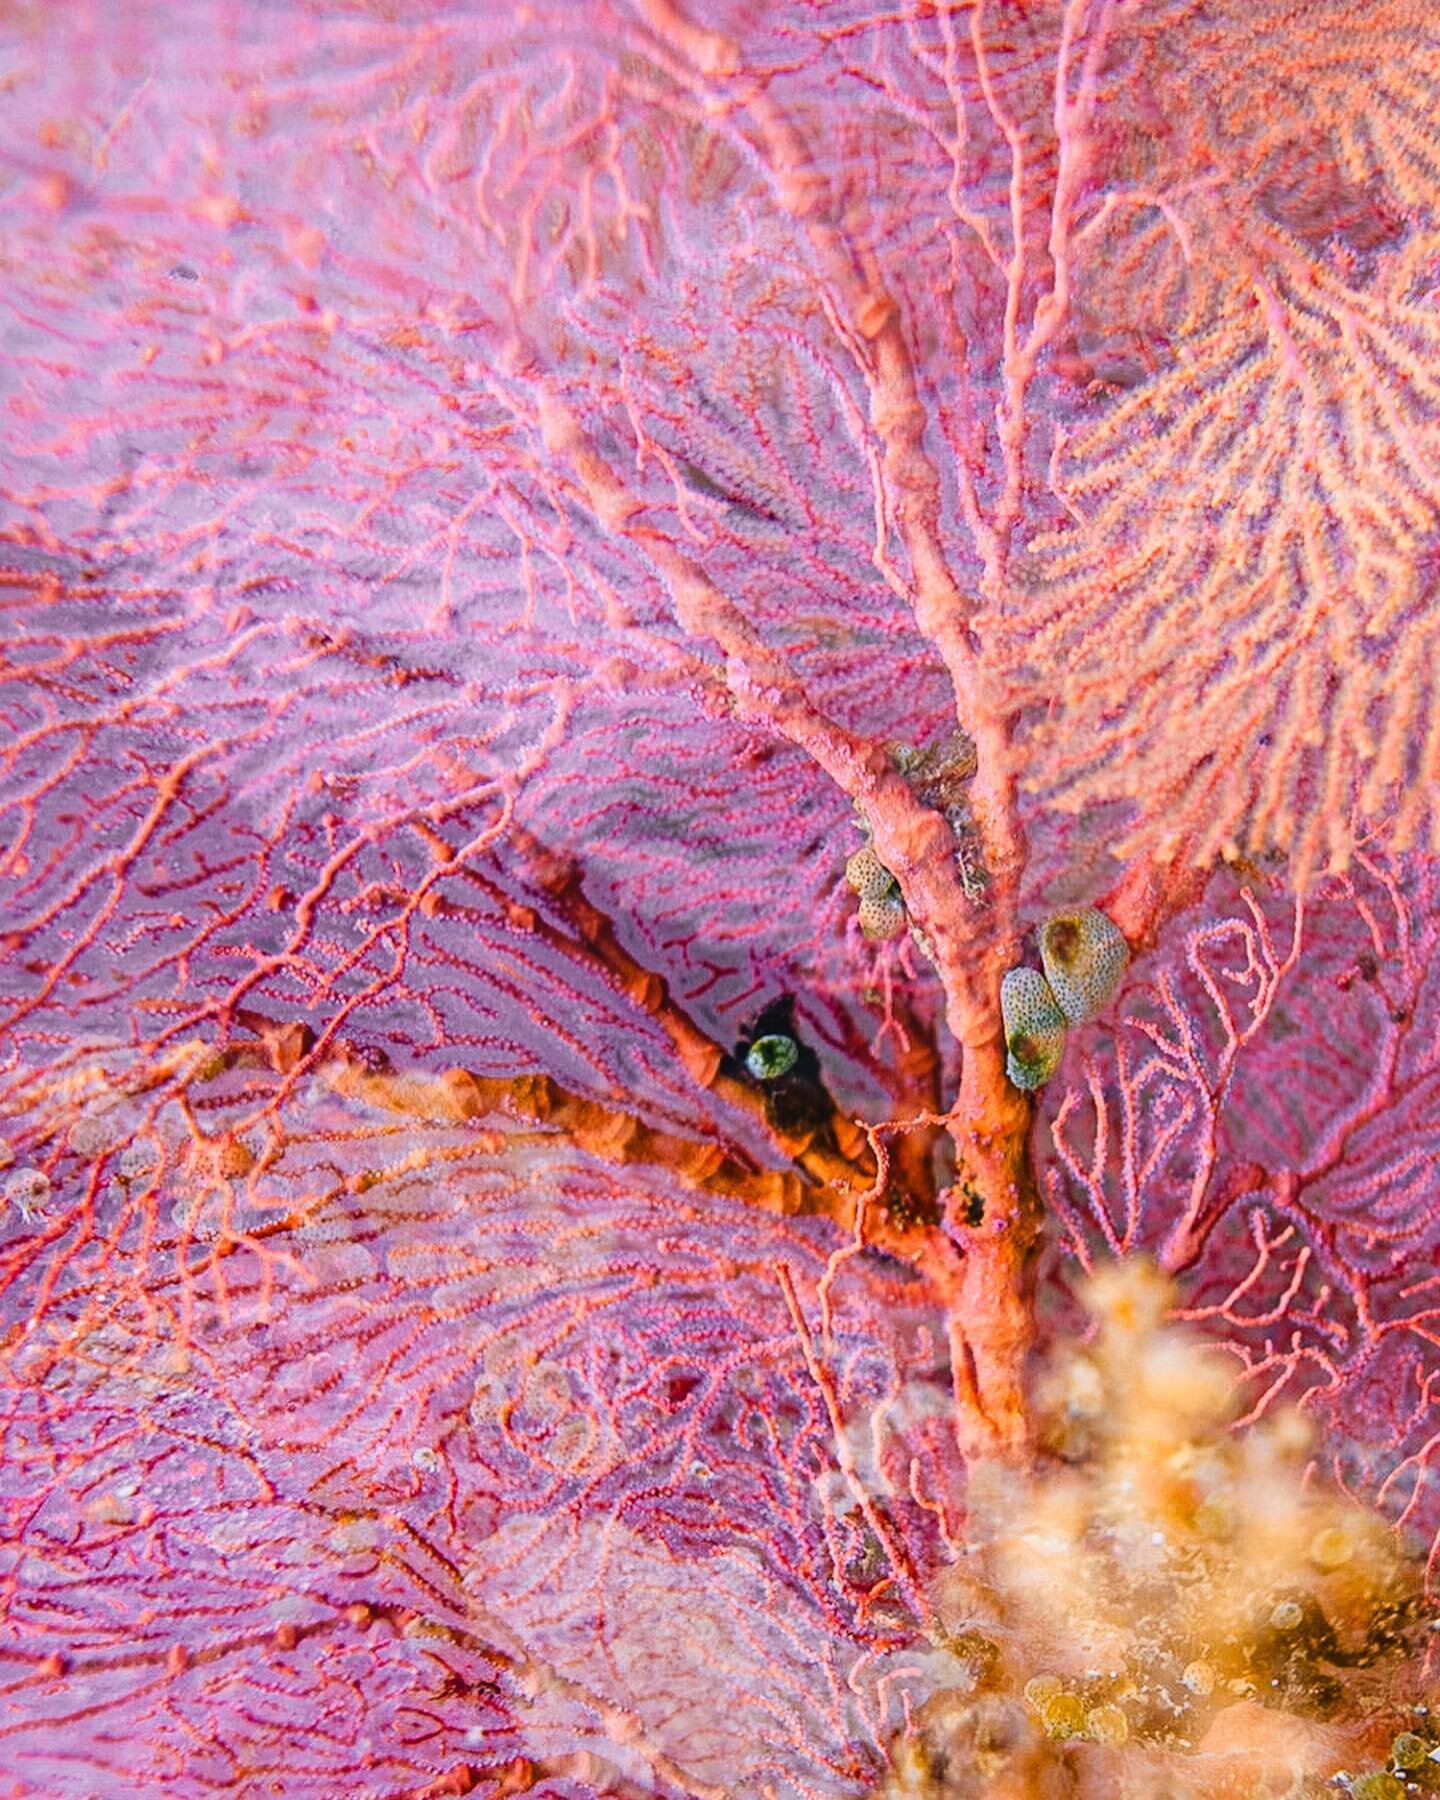 Pastel Dreamstates 🪸 

These stunning fan corals acted as a perfect metaphor for just how beautiful yet fragile our oceans are. Vibrant ecosystems are delicately balanced, yet without the necessary care they are easily fractured and destroyed (see l